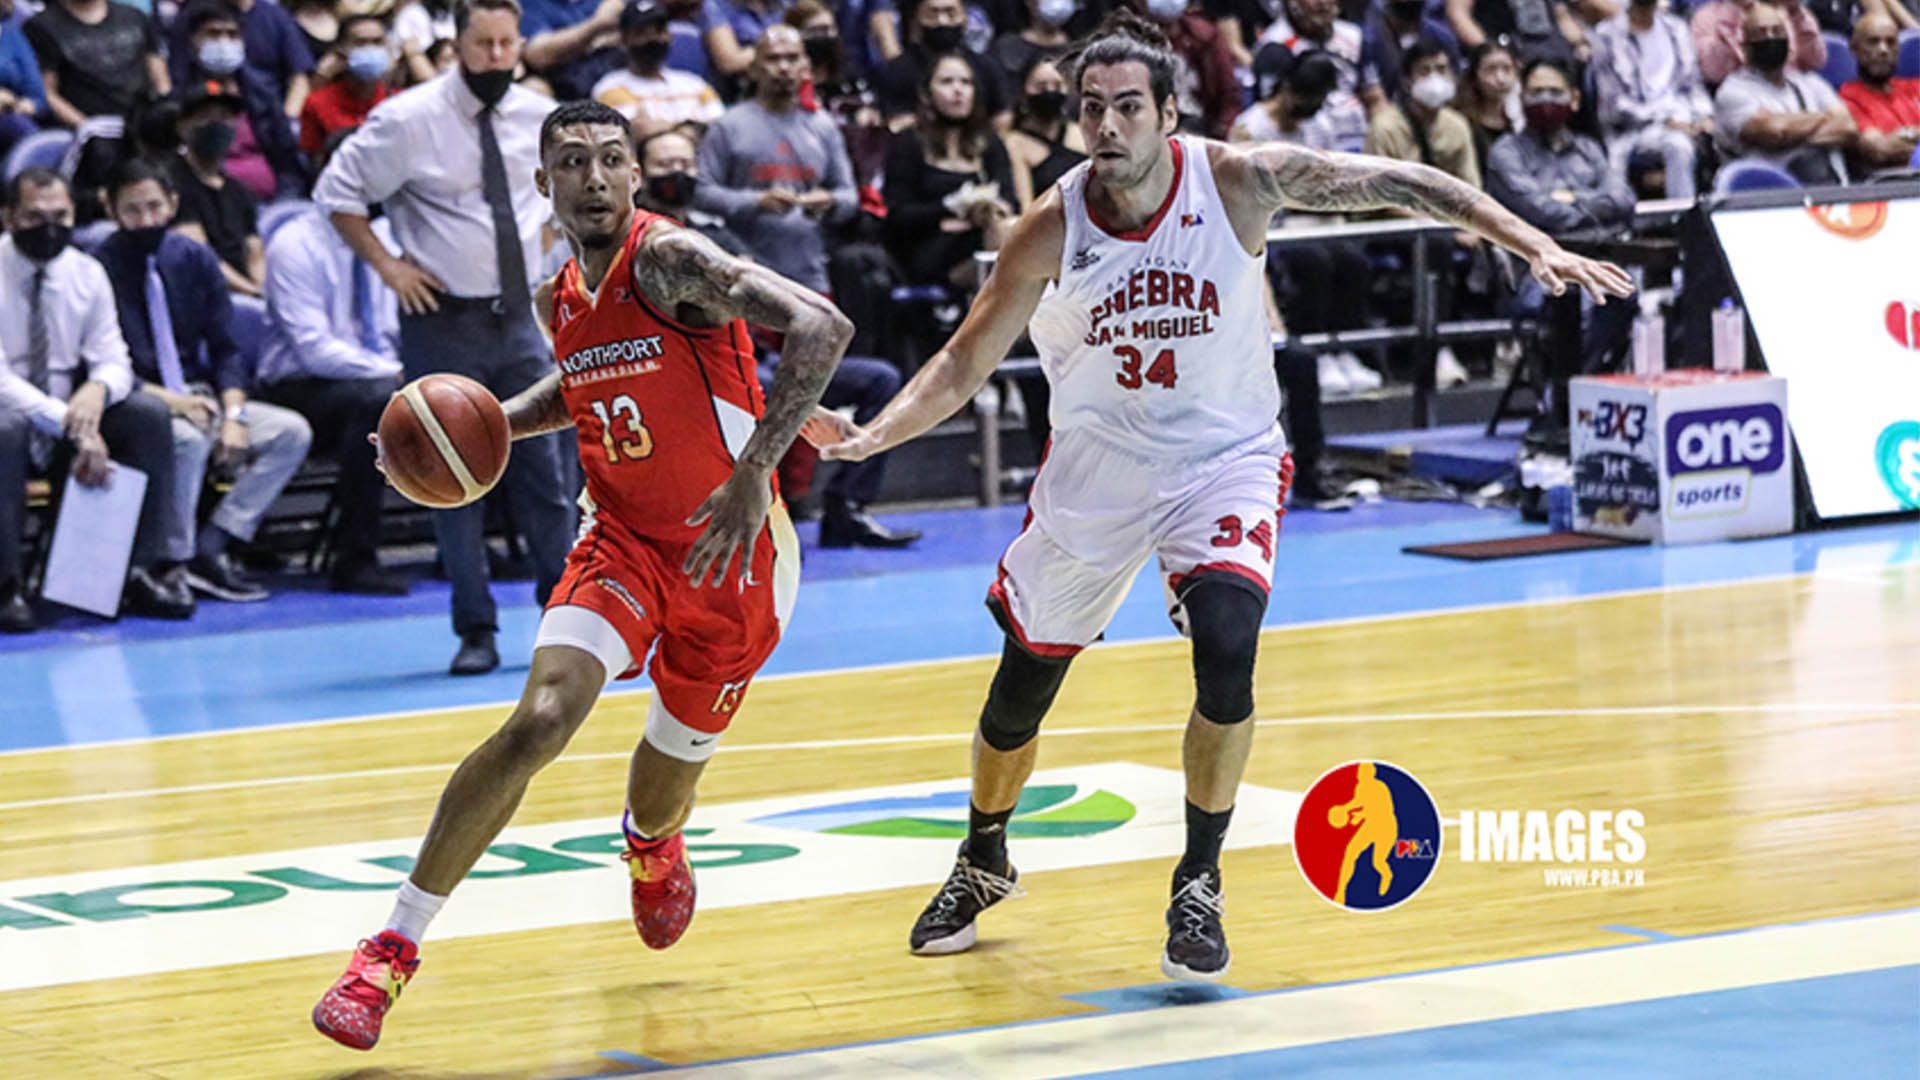 Wilson's perfect game vs. Barangay Ginebra earns him Player of the